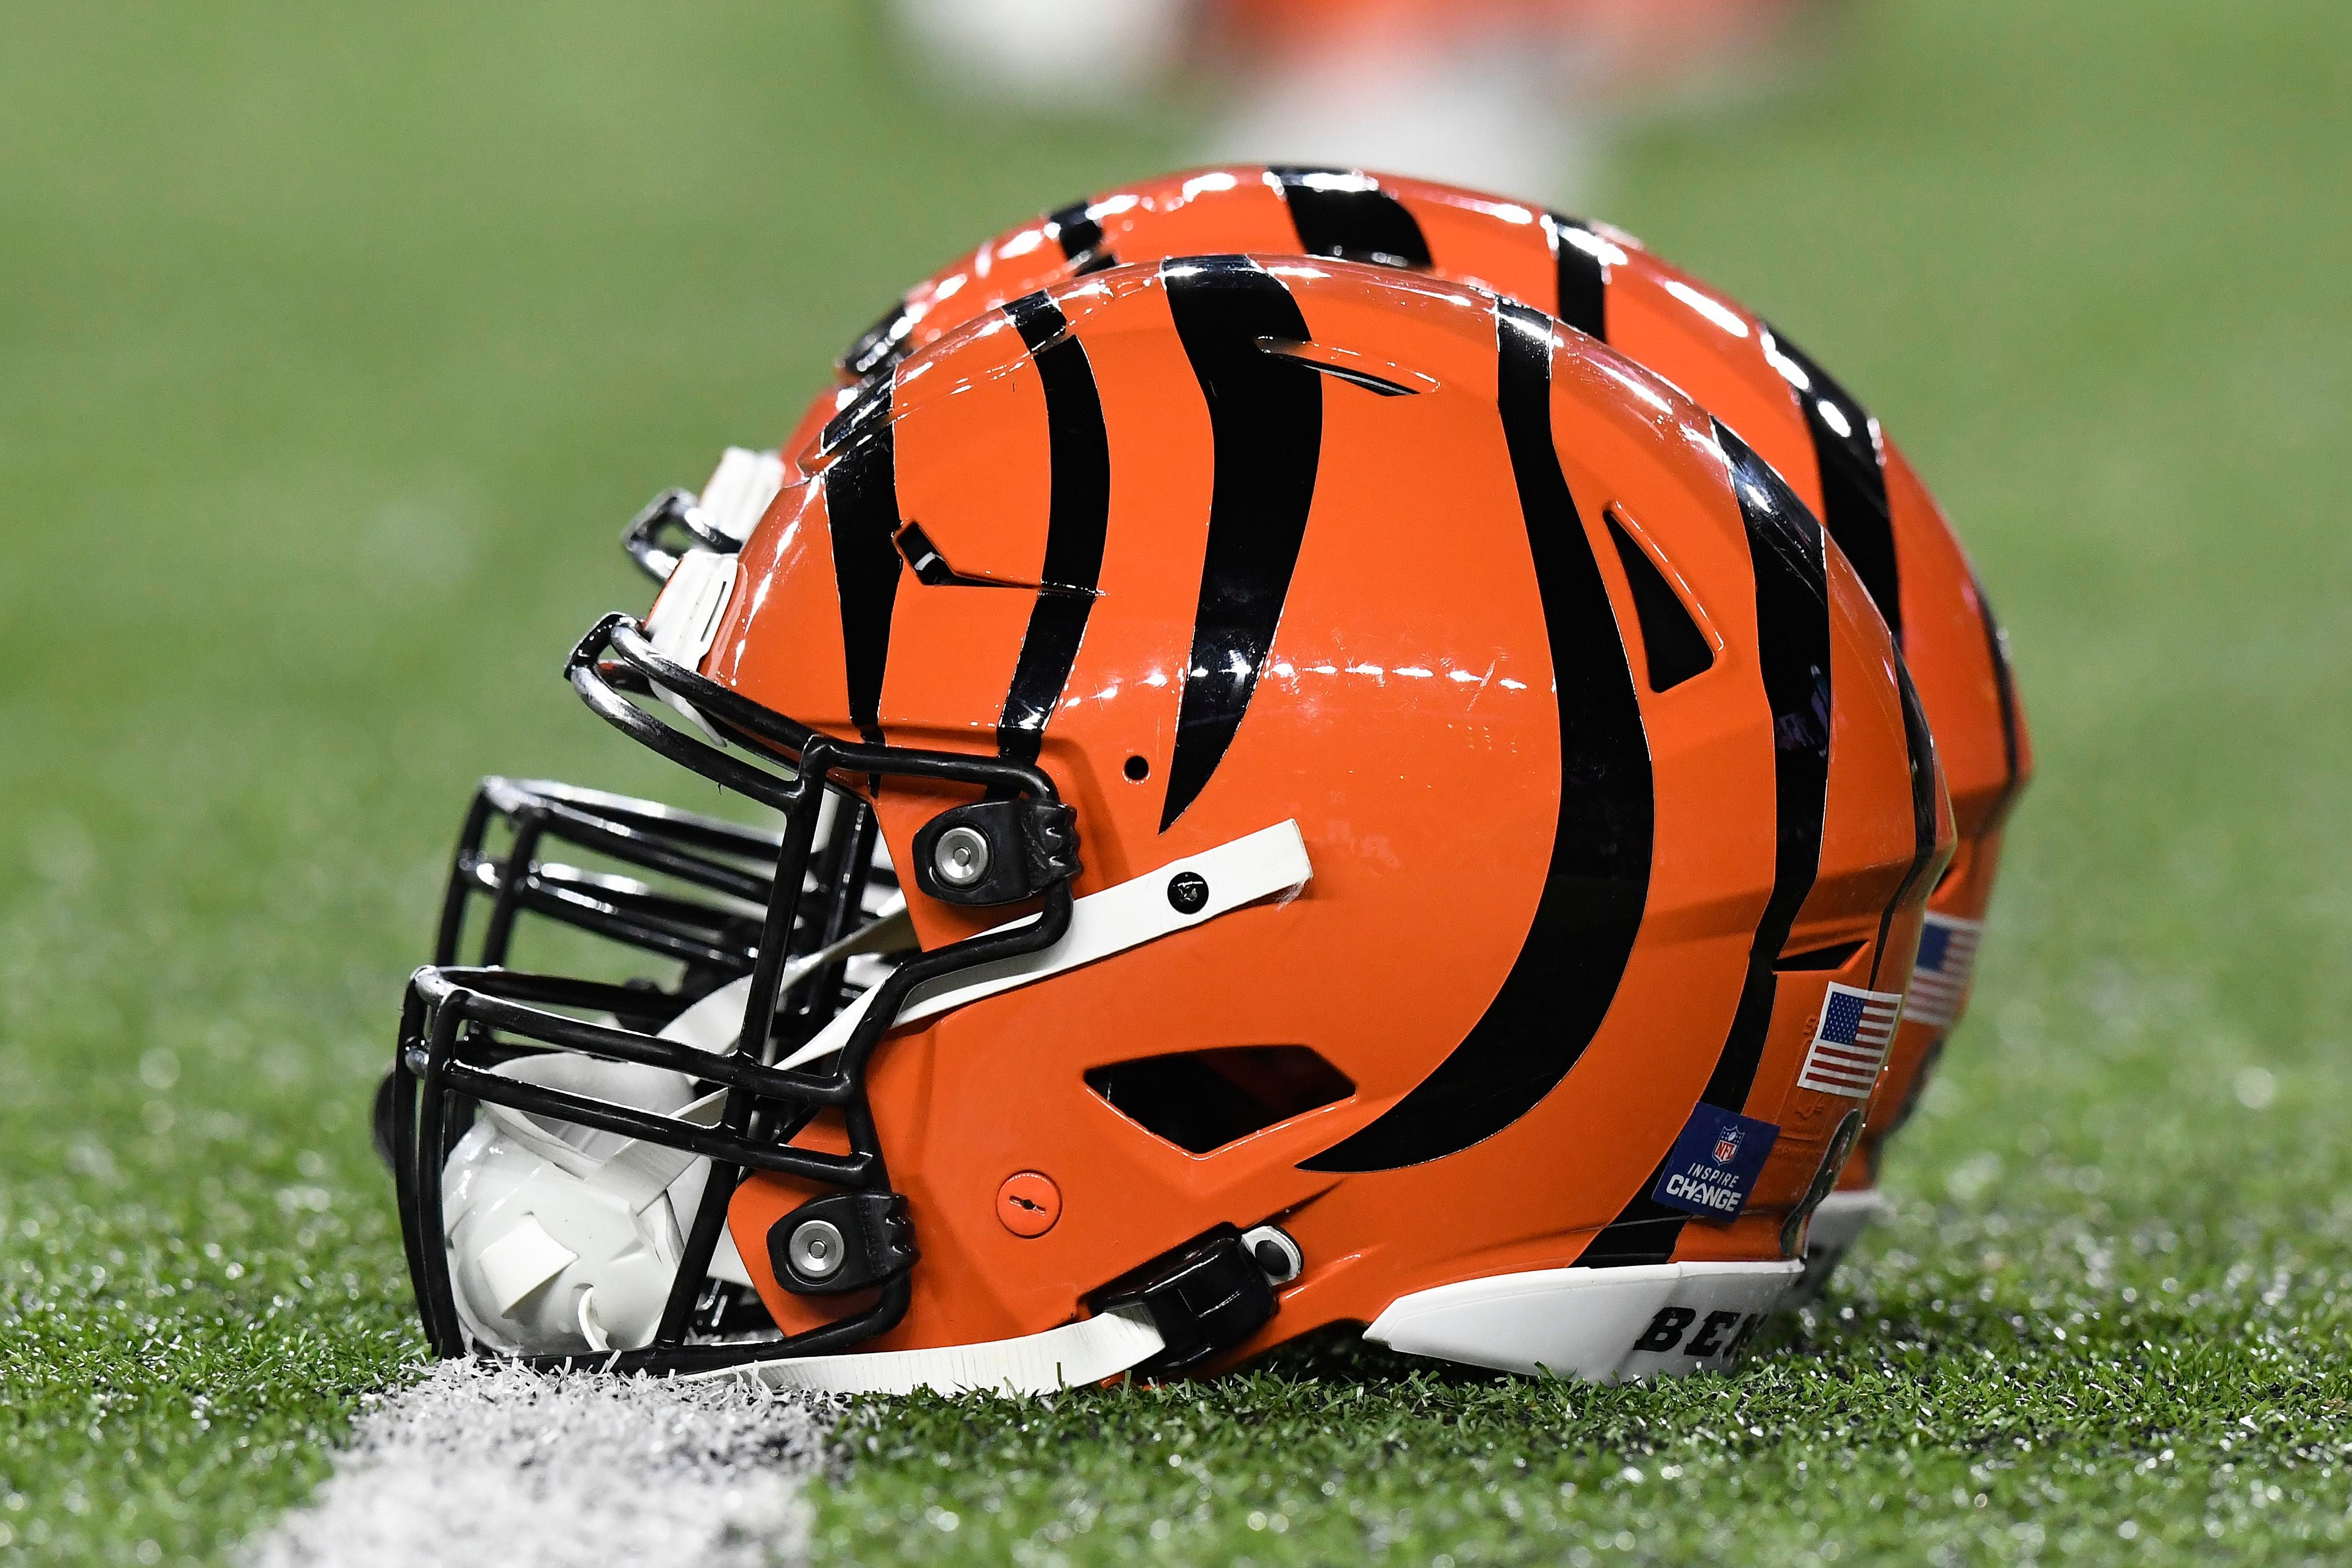 Bengals share how to get refunded for canceled game against